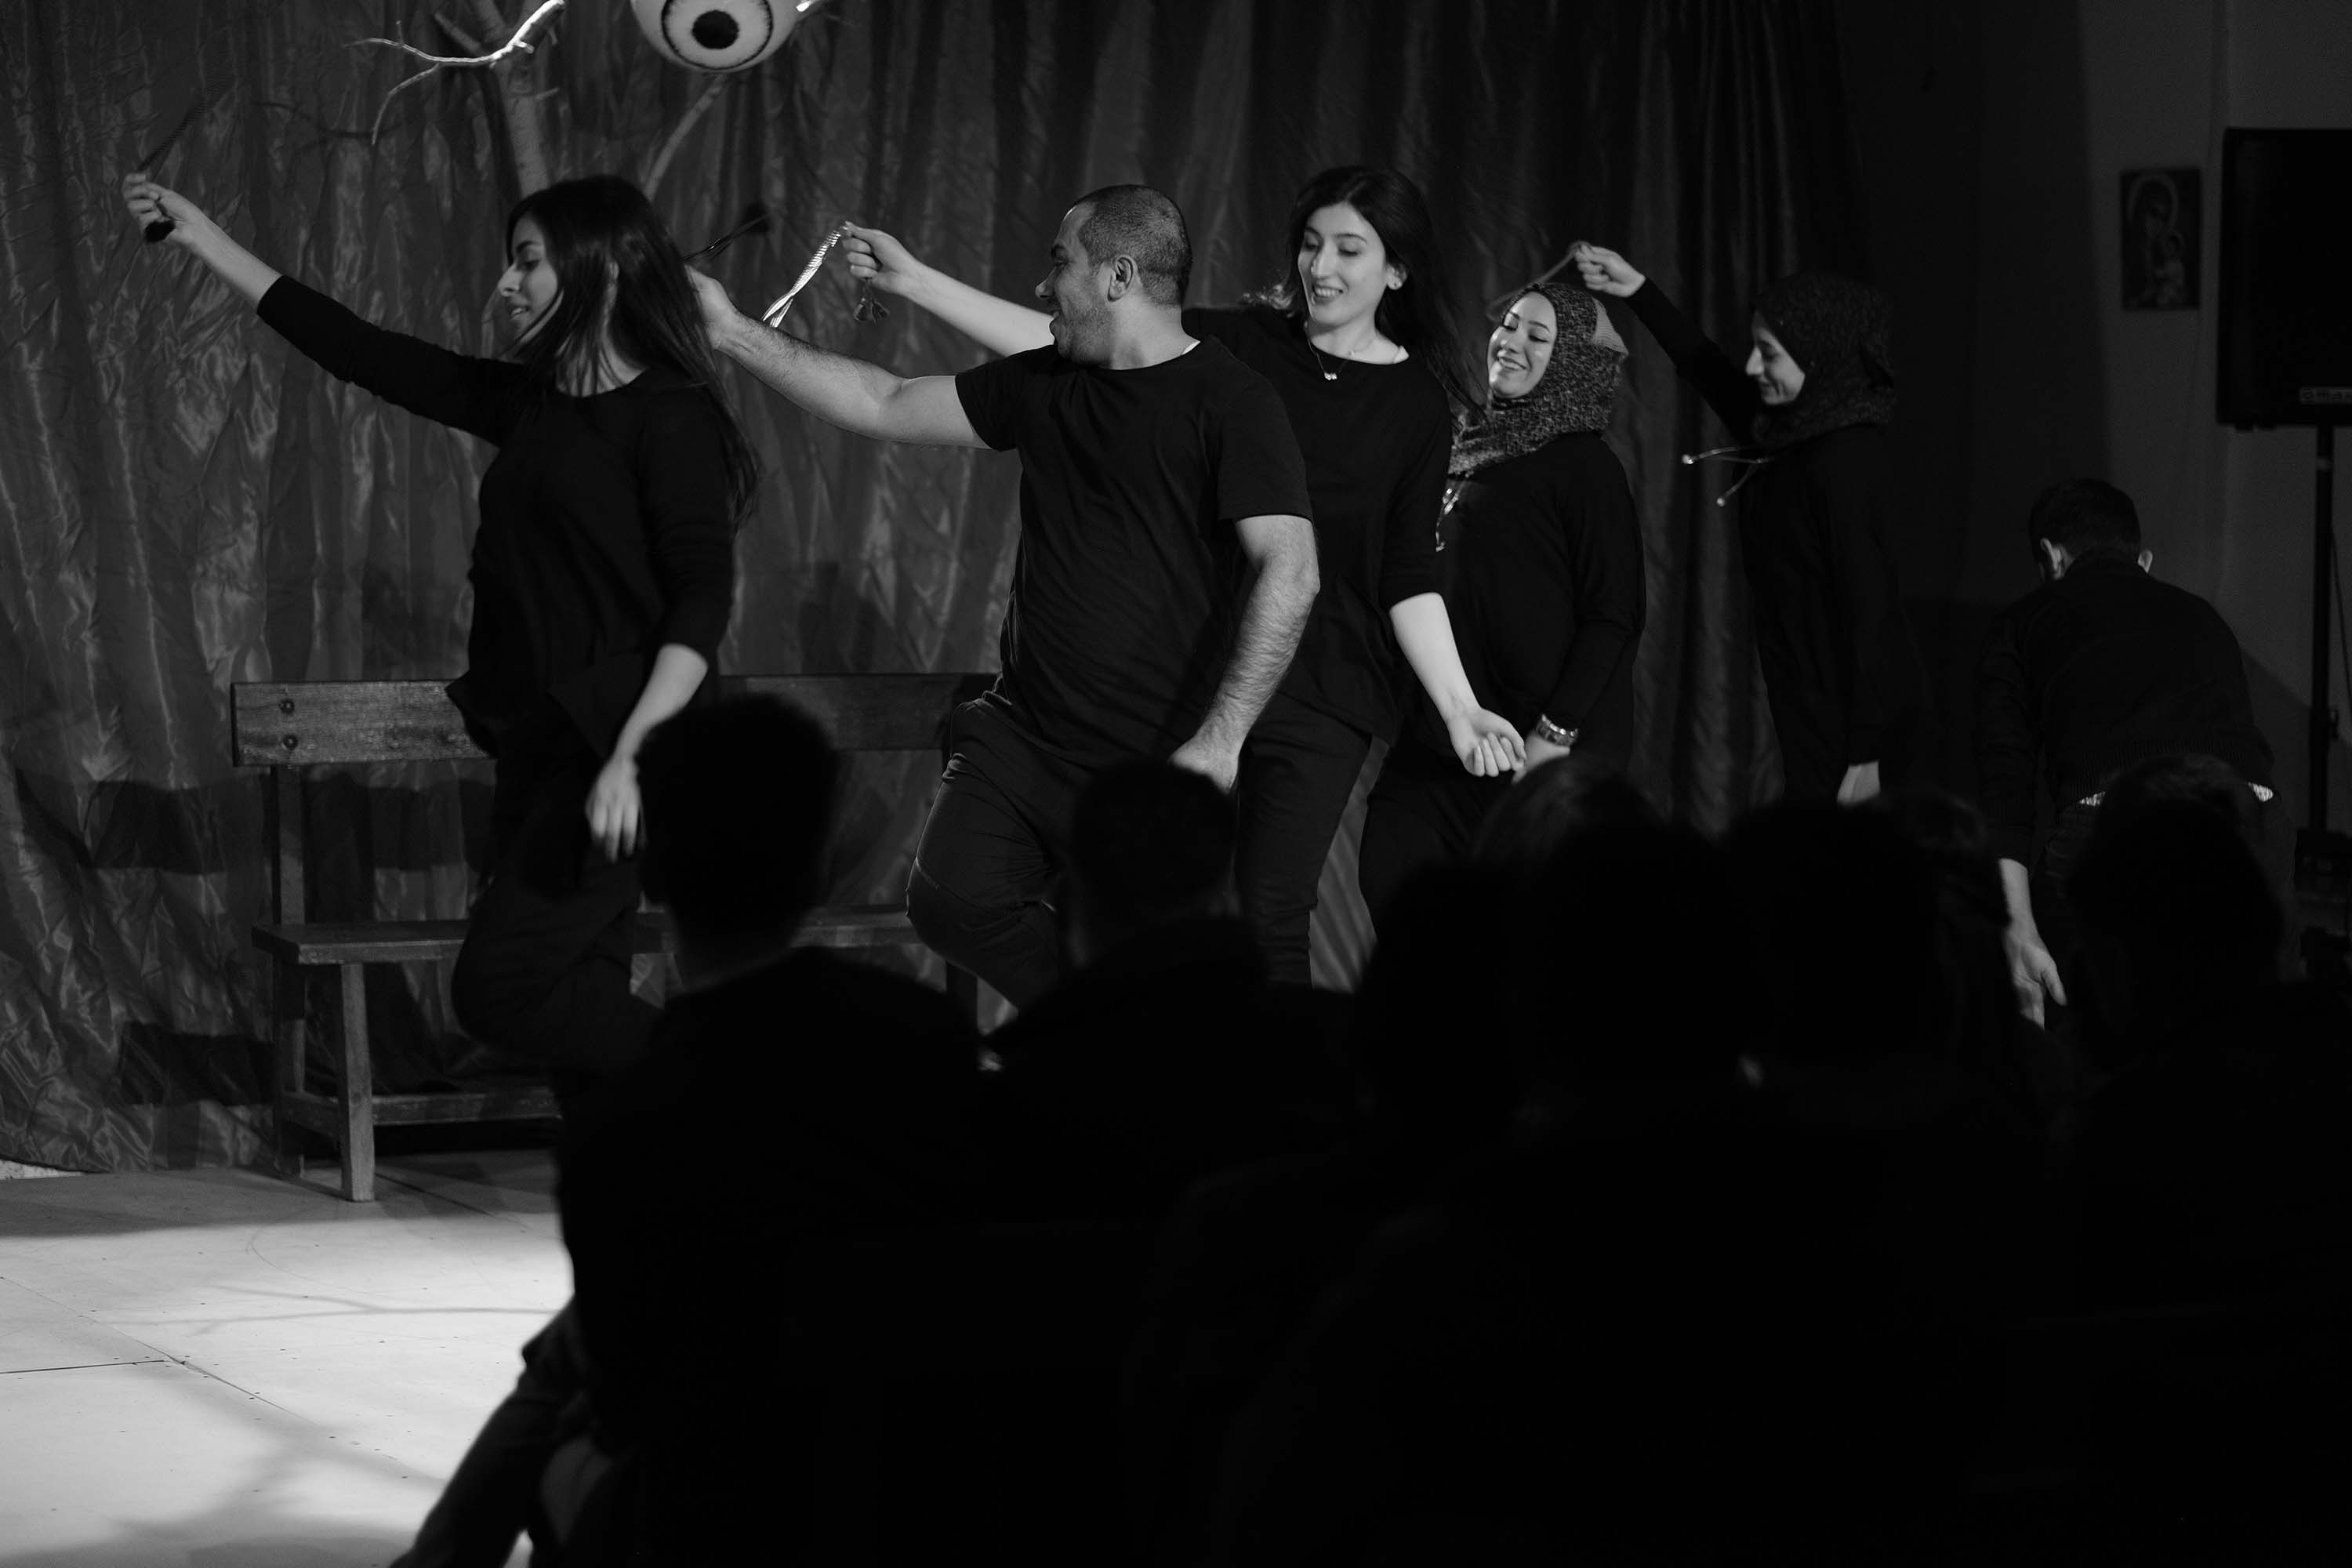  A series of black-and-whie images showing actors on a stage while moving around, holding hands and bowing in a line, standing in two lines across from each other holding ropes and in a single line dancing.